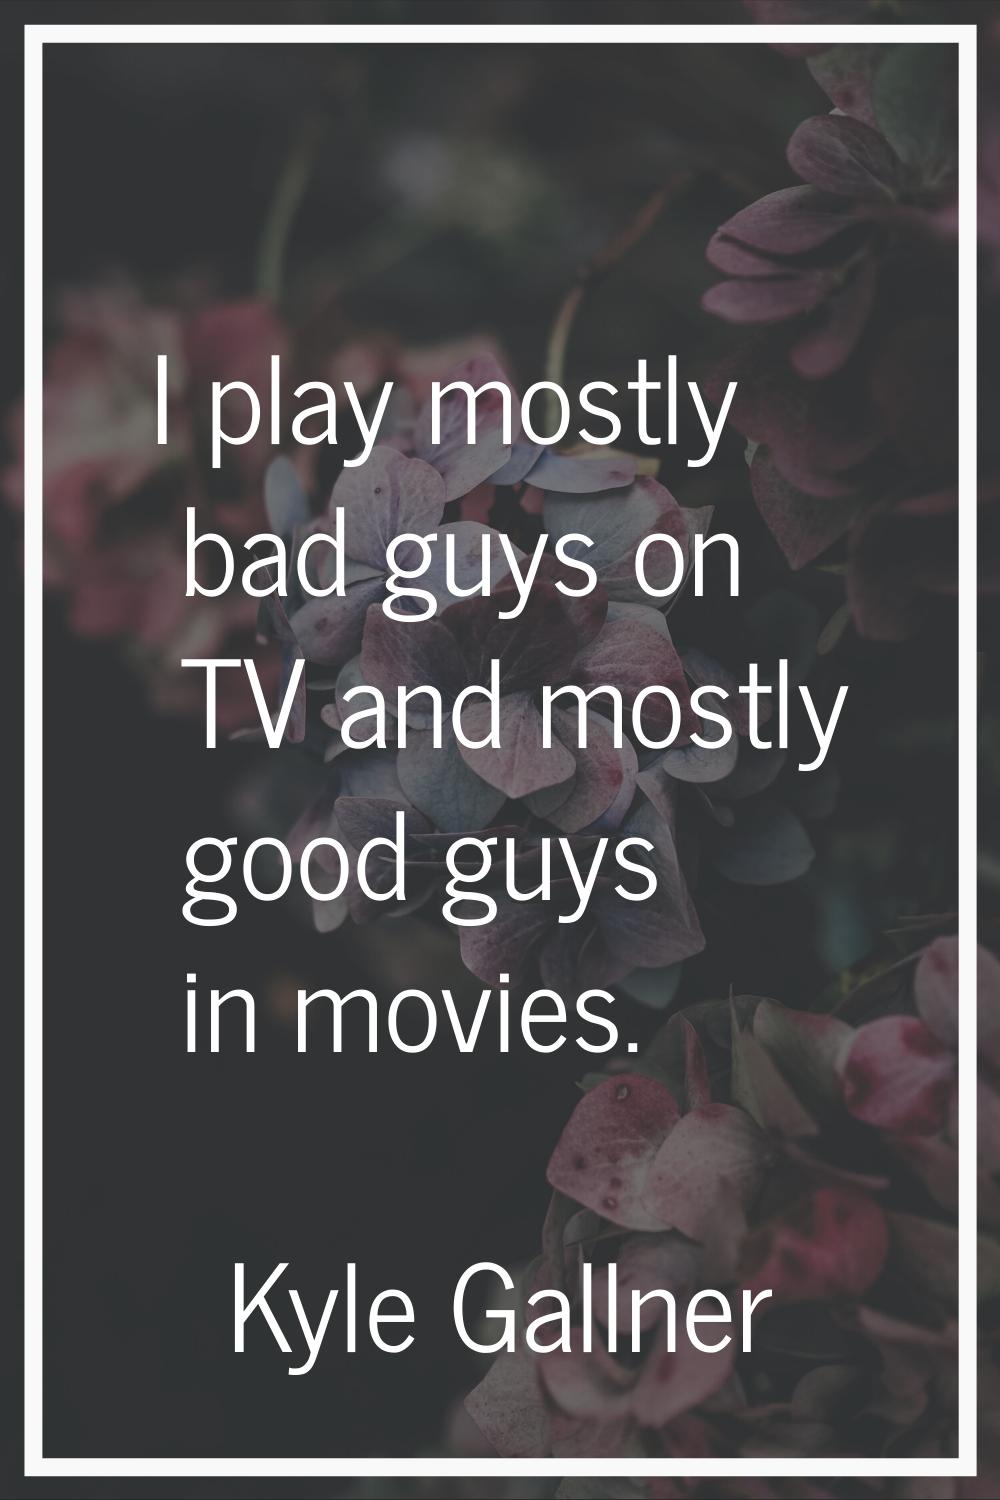 I play mostly bad guys on TV and mostly good guys in movies.